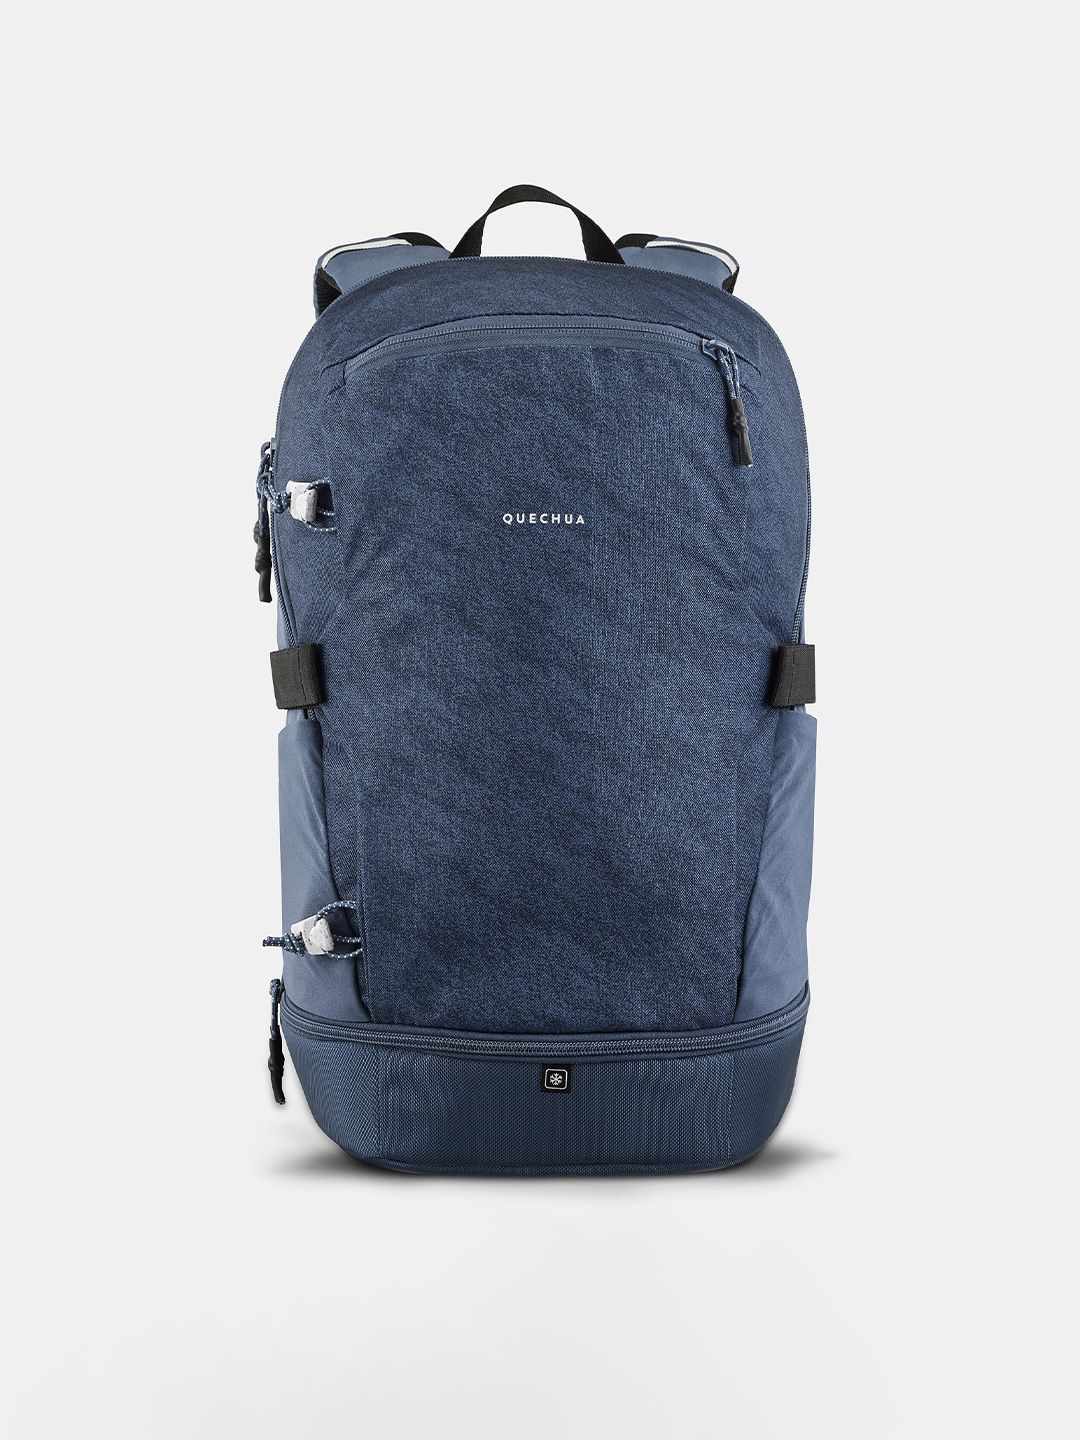 Quechua By Decathlon Unisex Blue Solid Backpack Price in India